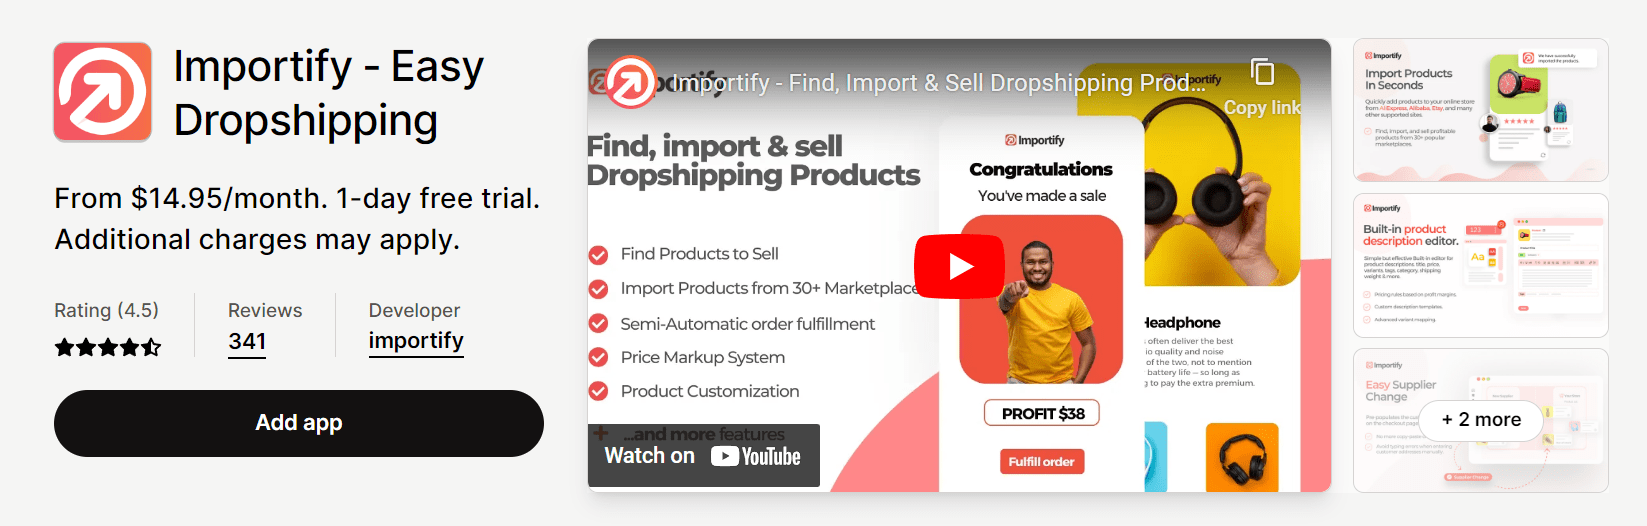 Importer l'application dropshipping